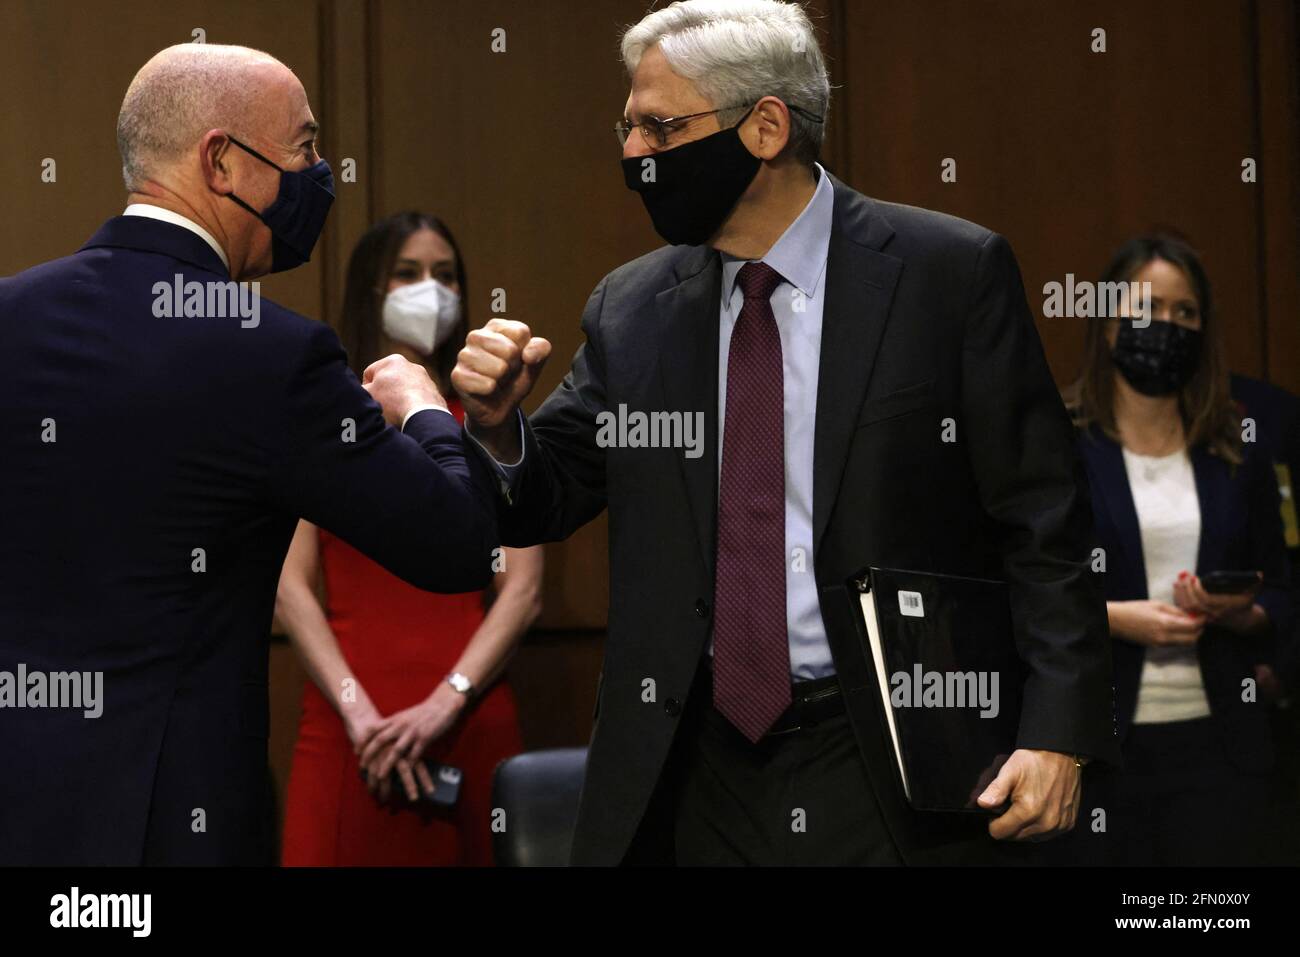 Washington, United States. 12th May, 2021. U.S. Attorney General Merrick Garland (L) greets Homeland Security Secretary Alejandro Mayorkas (R) prior to a hearing before the Senate Appropriations Committee at Hart Senate Office Building on May 12, 2021 on Capitol Hill in Washington, DC, USA. The committee held a hearing on 'Domestic Violent Extremism in America.' Photo by Alex Wong/Pool/ABACAPRESS.COM Credit: Abaca Press/Alamy Live News Stock Photo